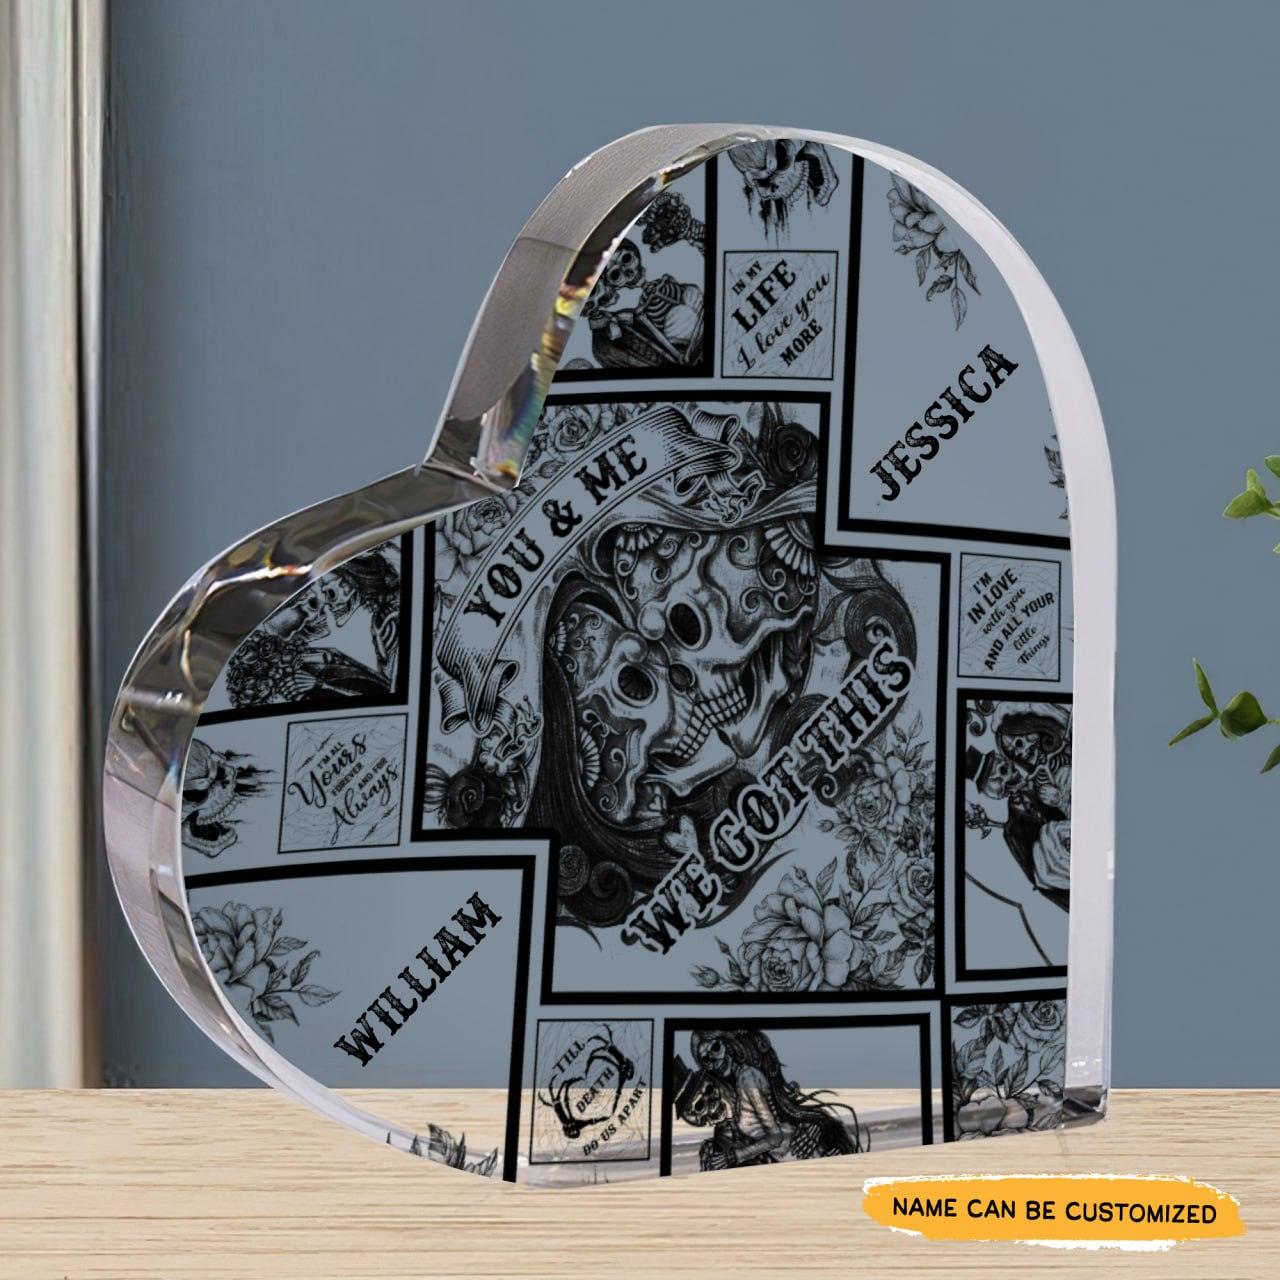 I'm Yours - Customized Skull Couple Crystal Heart Anniversary Gifts - Wonder Skull